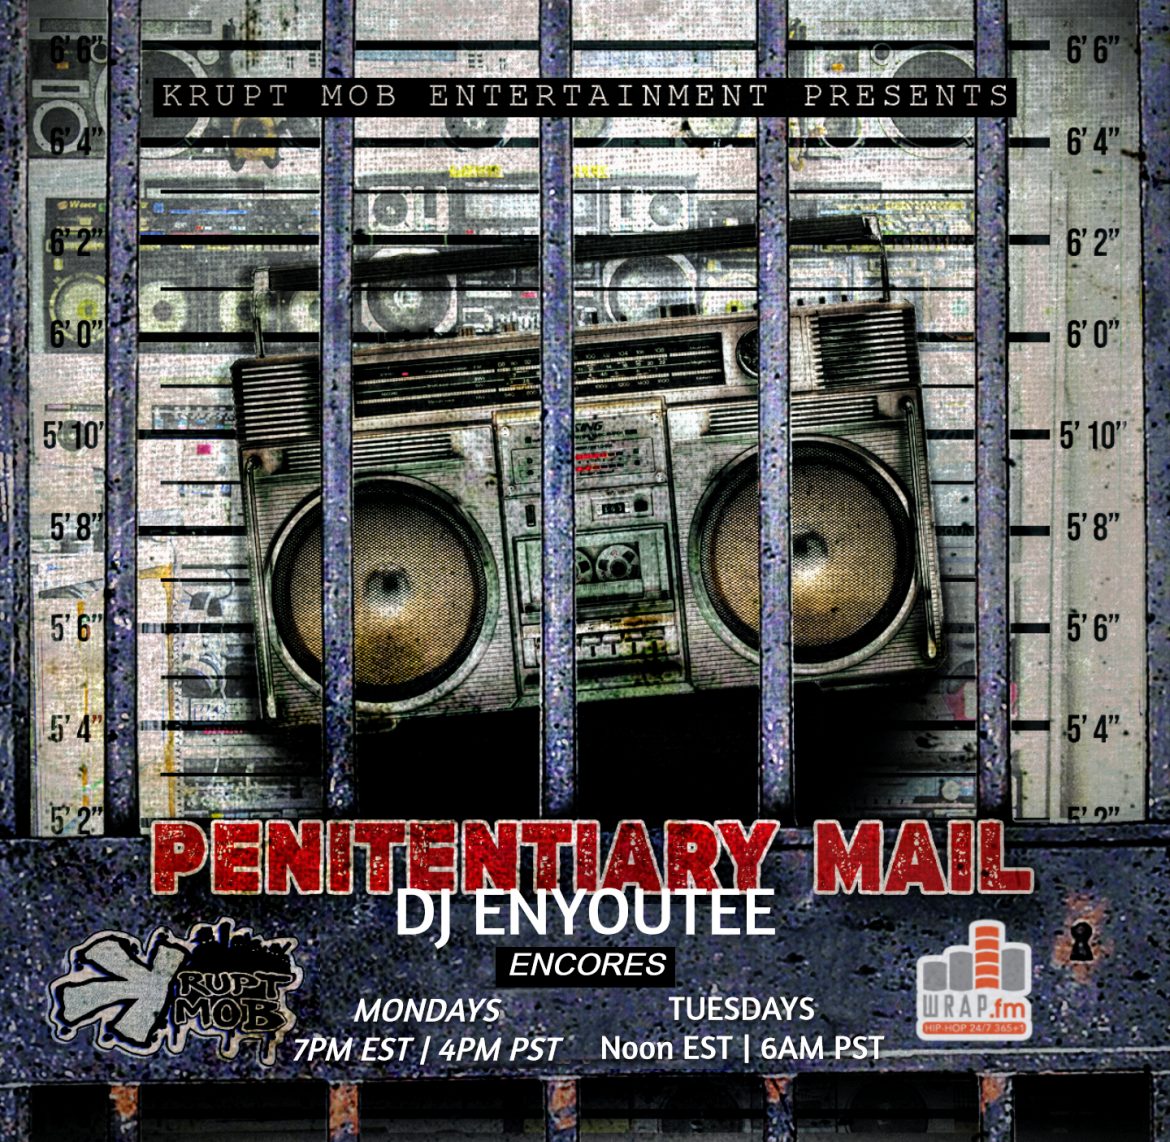 Penitentiary Mail DJ Enyoutee